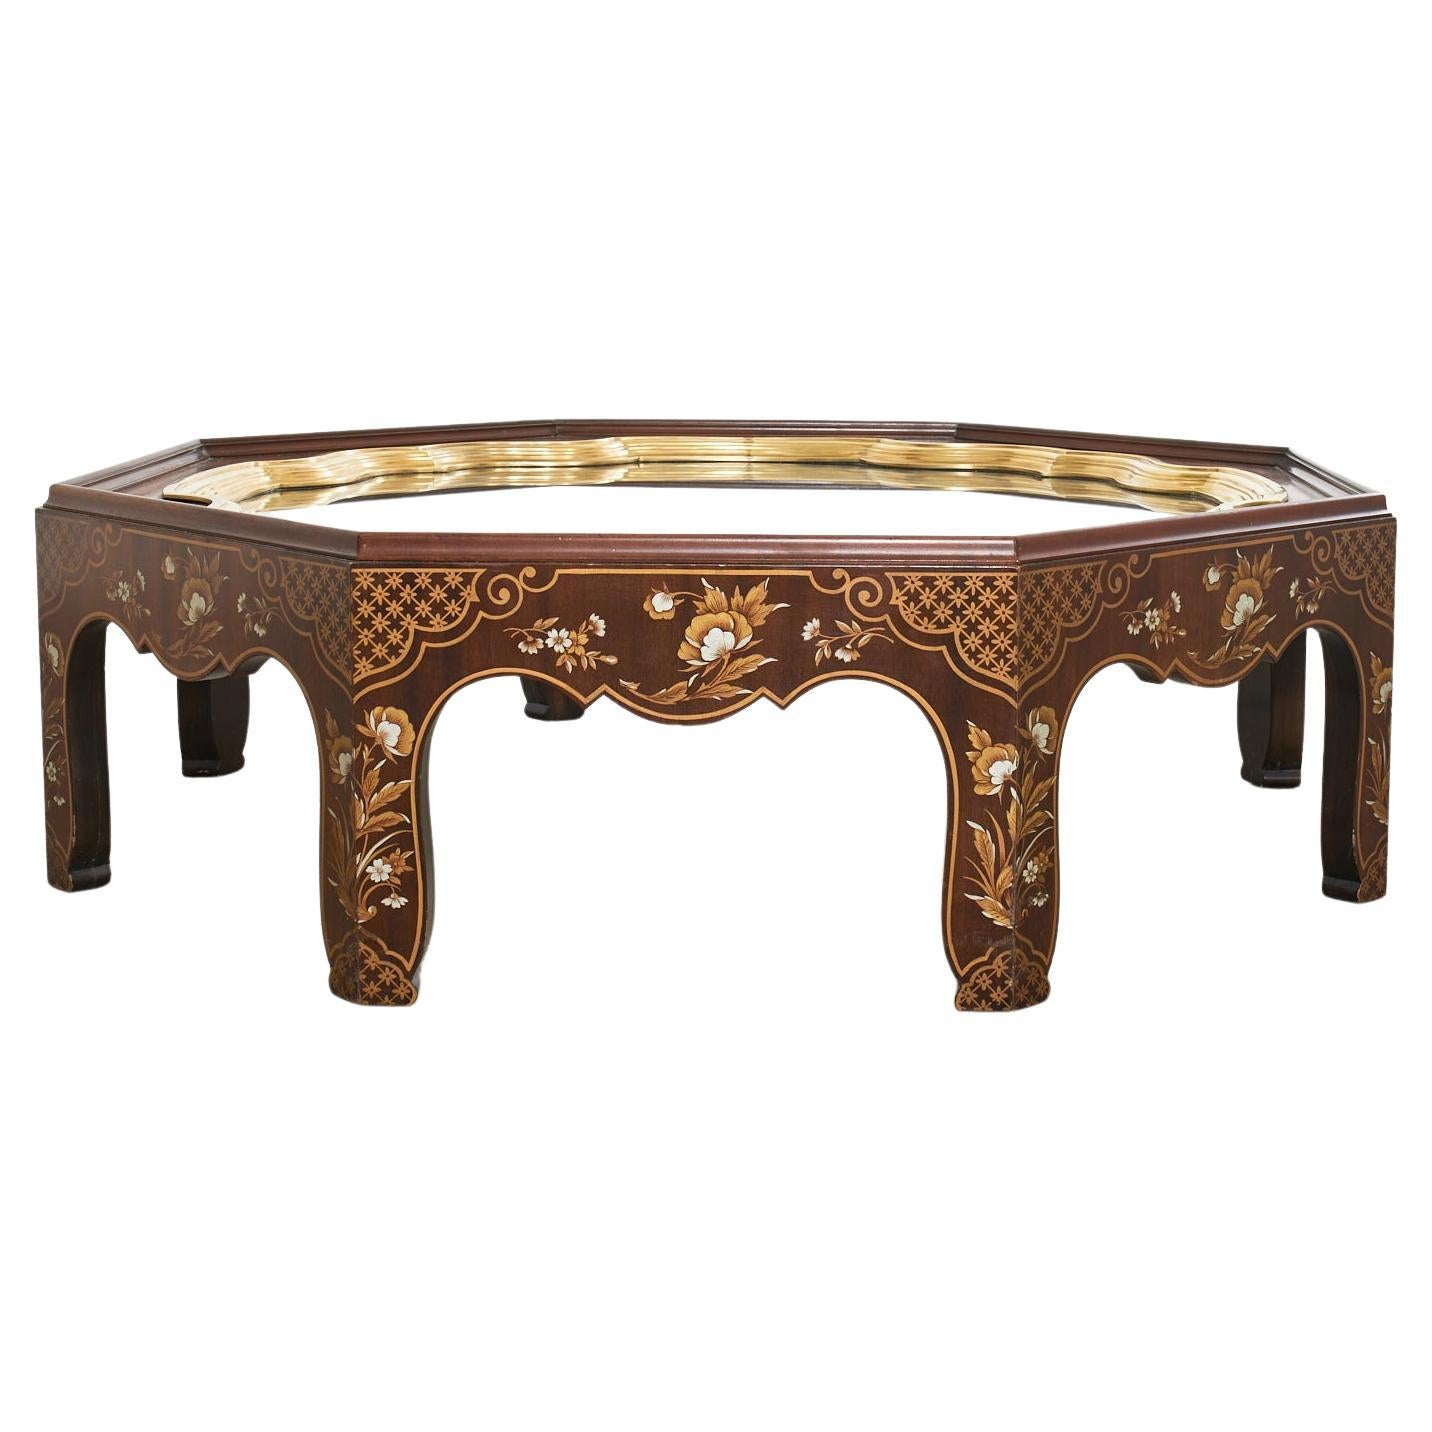 Baker Chinoiserie Octagonal Lacquered Brass Tray Cocktail Table